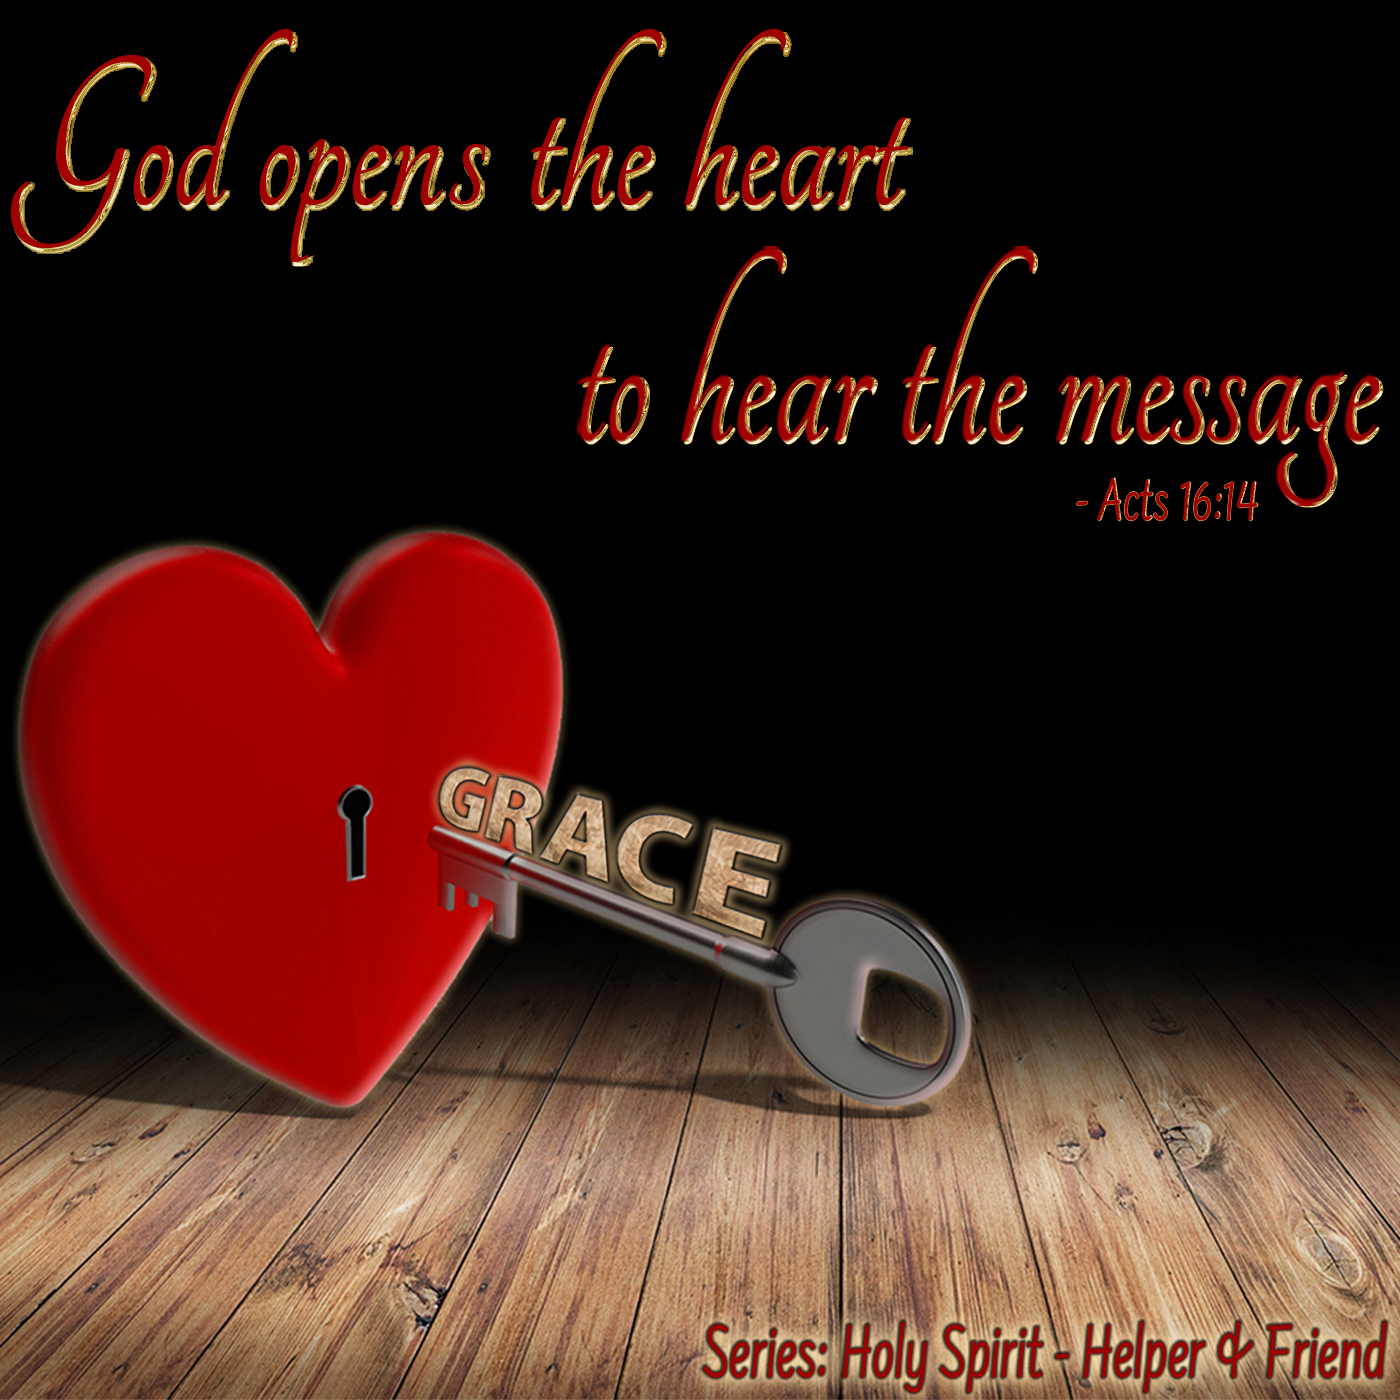 Message of the Hour Believers Tabernacle